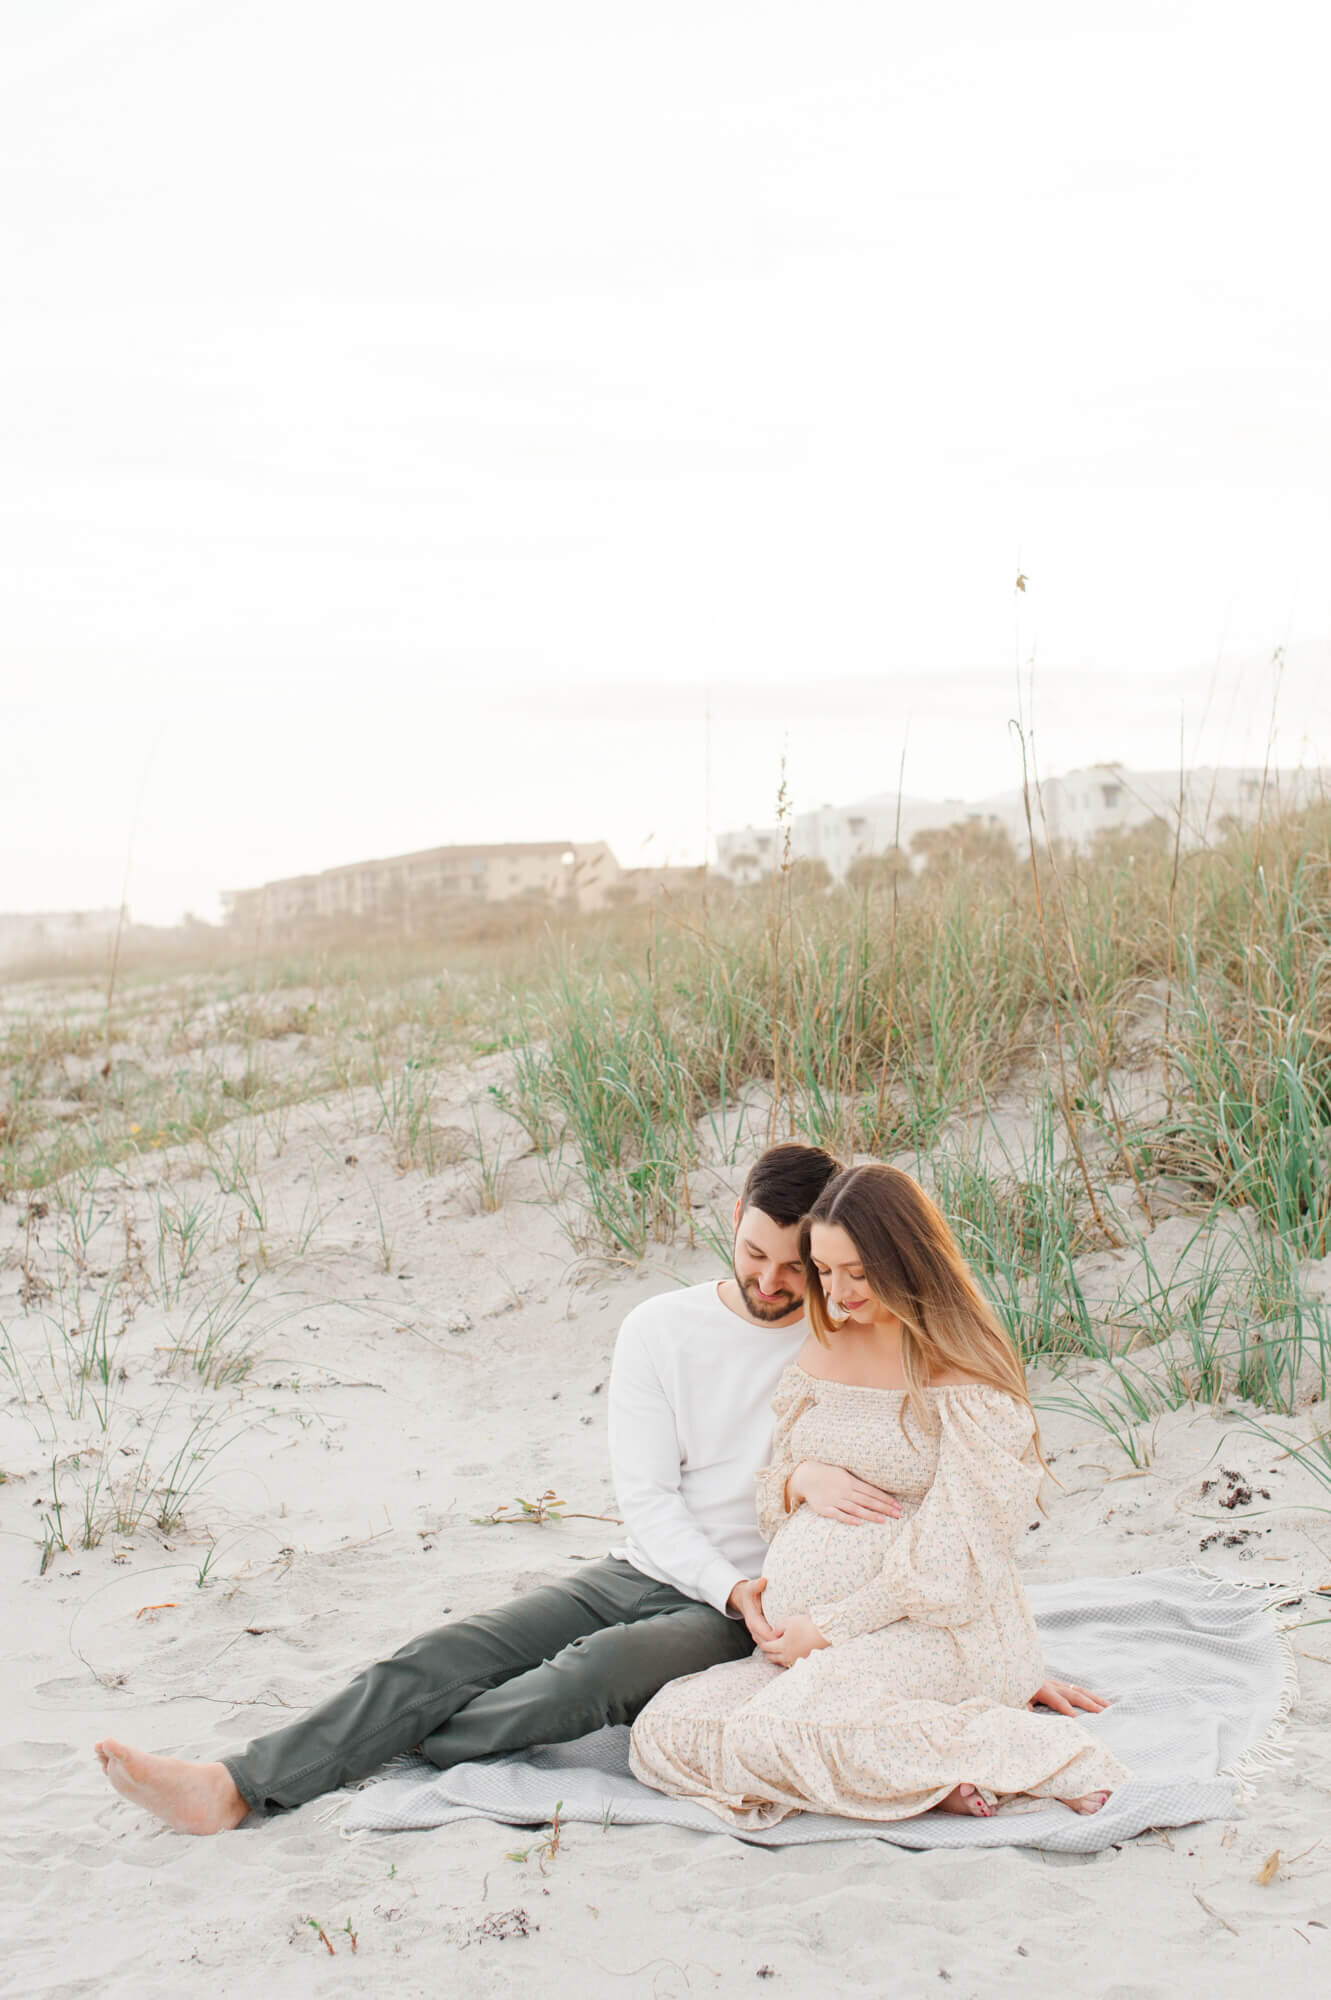 Orlando maternity session on the beach of mom and dad sitting in the dunes holding her belly